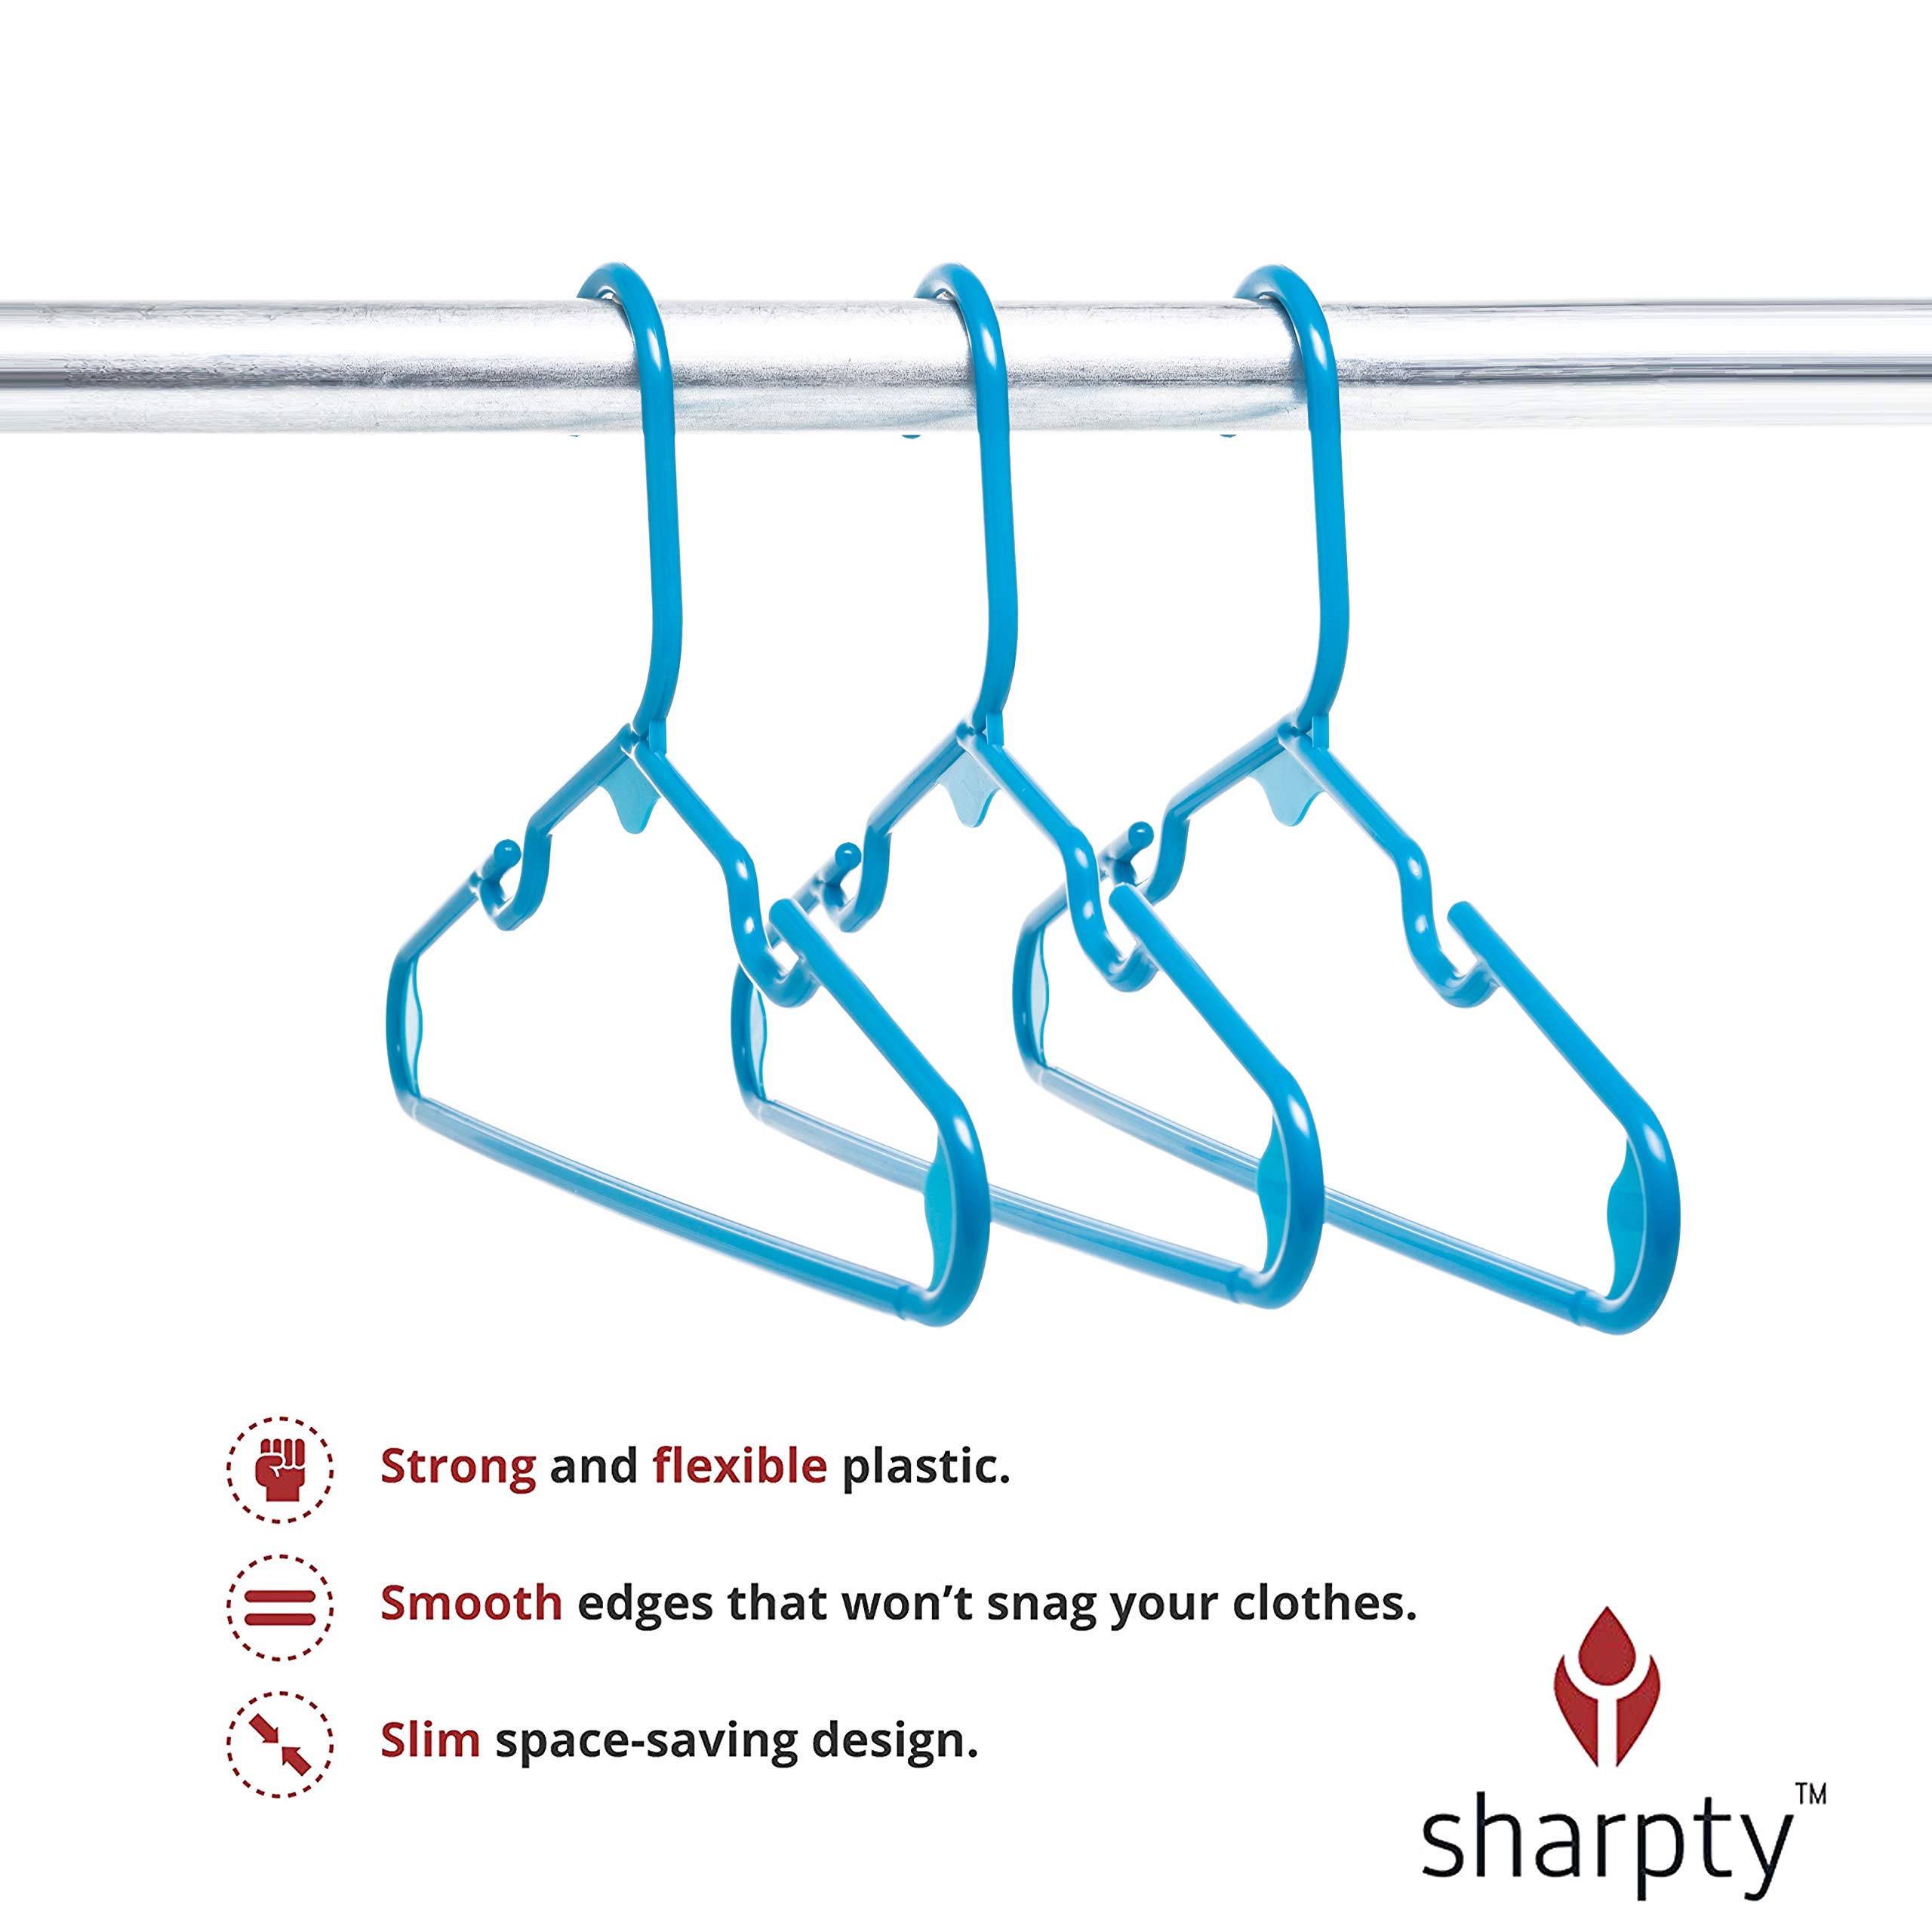 Sharpty Kids Plastic Hangers, Children's Hangers for Baby, Toddler, and Child Clothes - Everyday Standard Use - Ideal for Boys and Girls Closet, Clothing, Pants, Coats, and More - Blue, 60 Pack